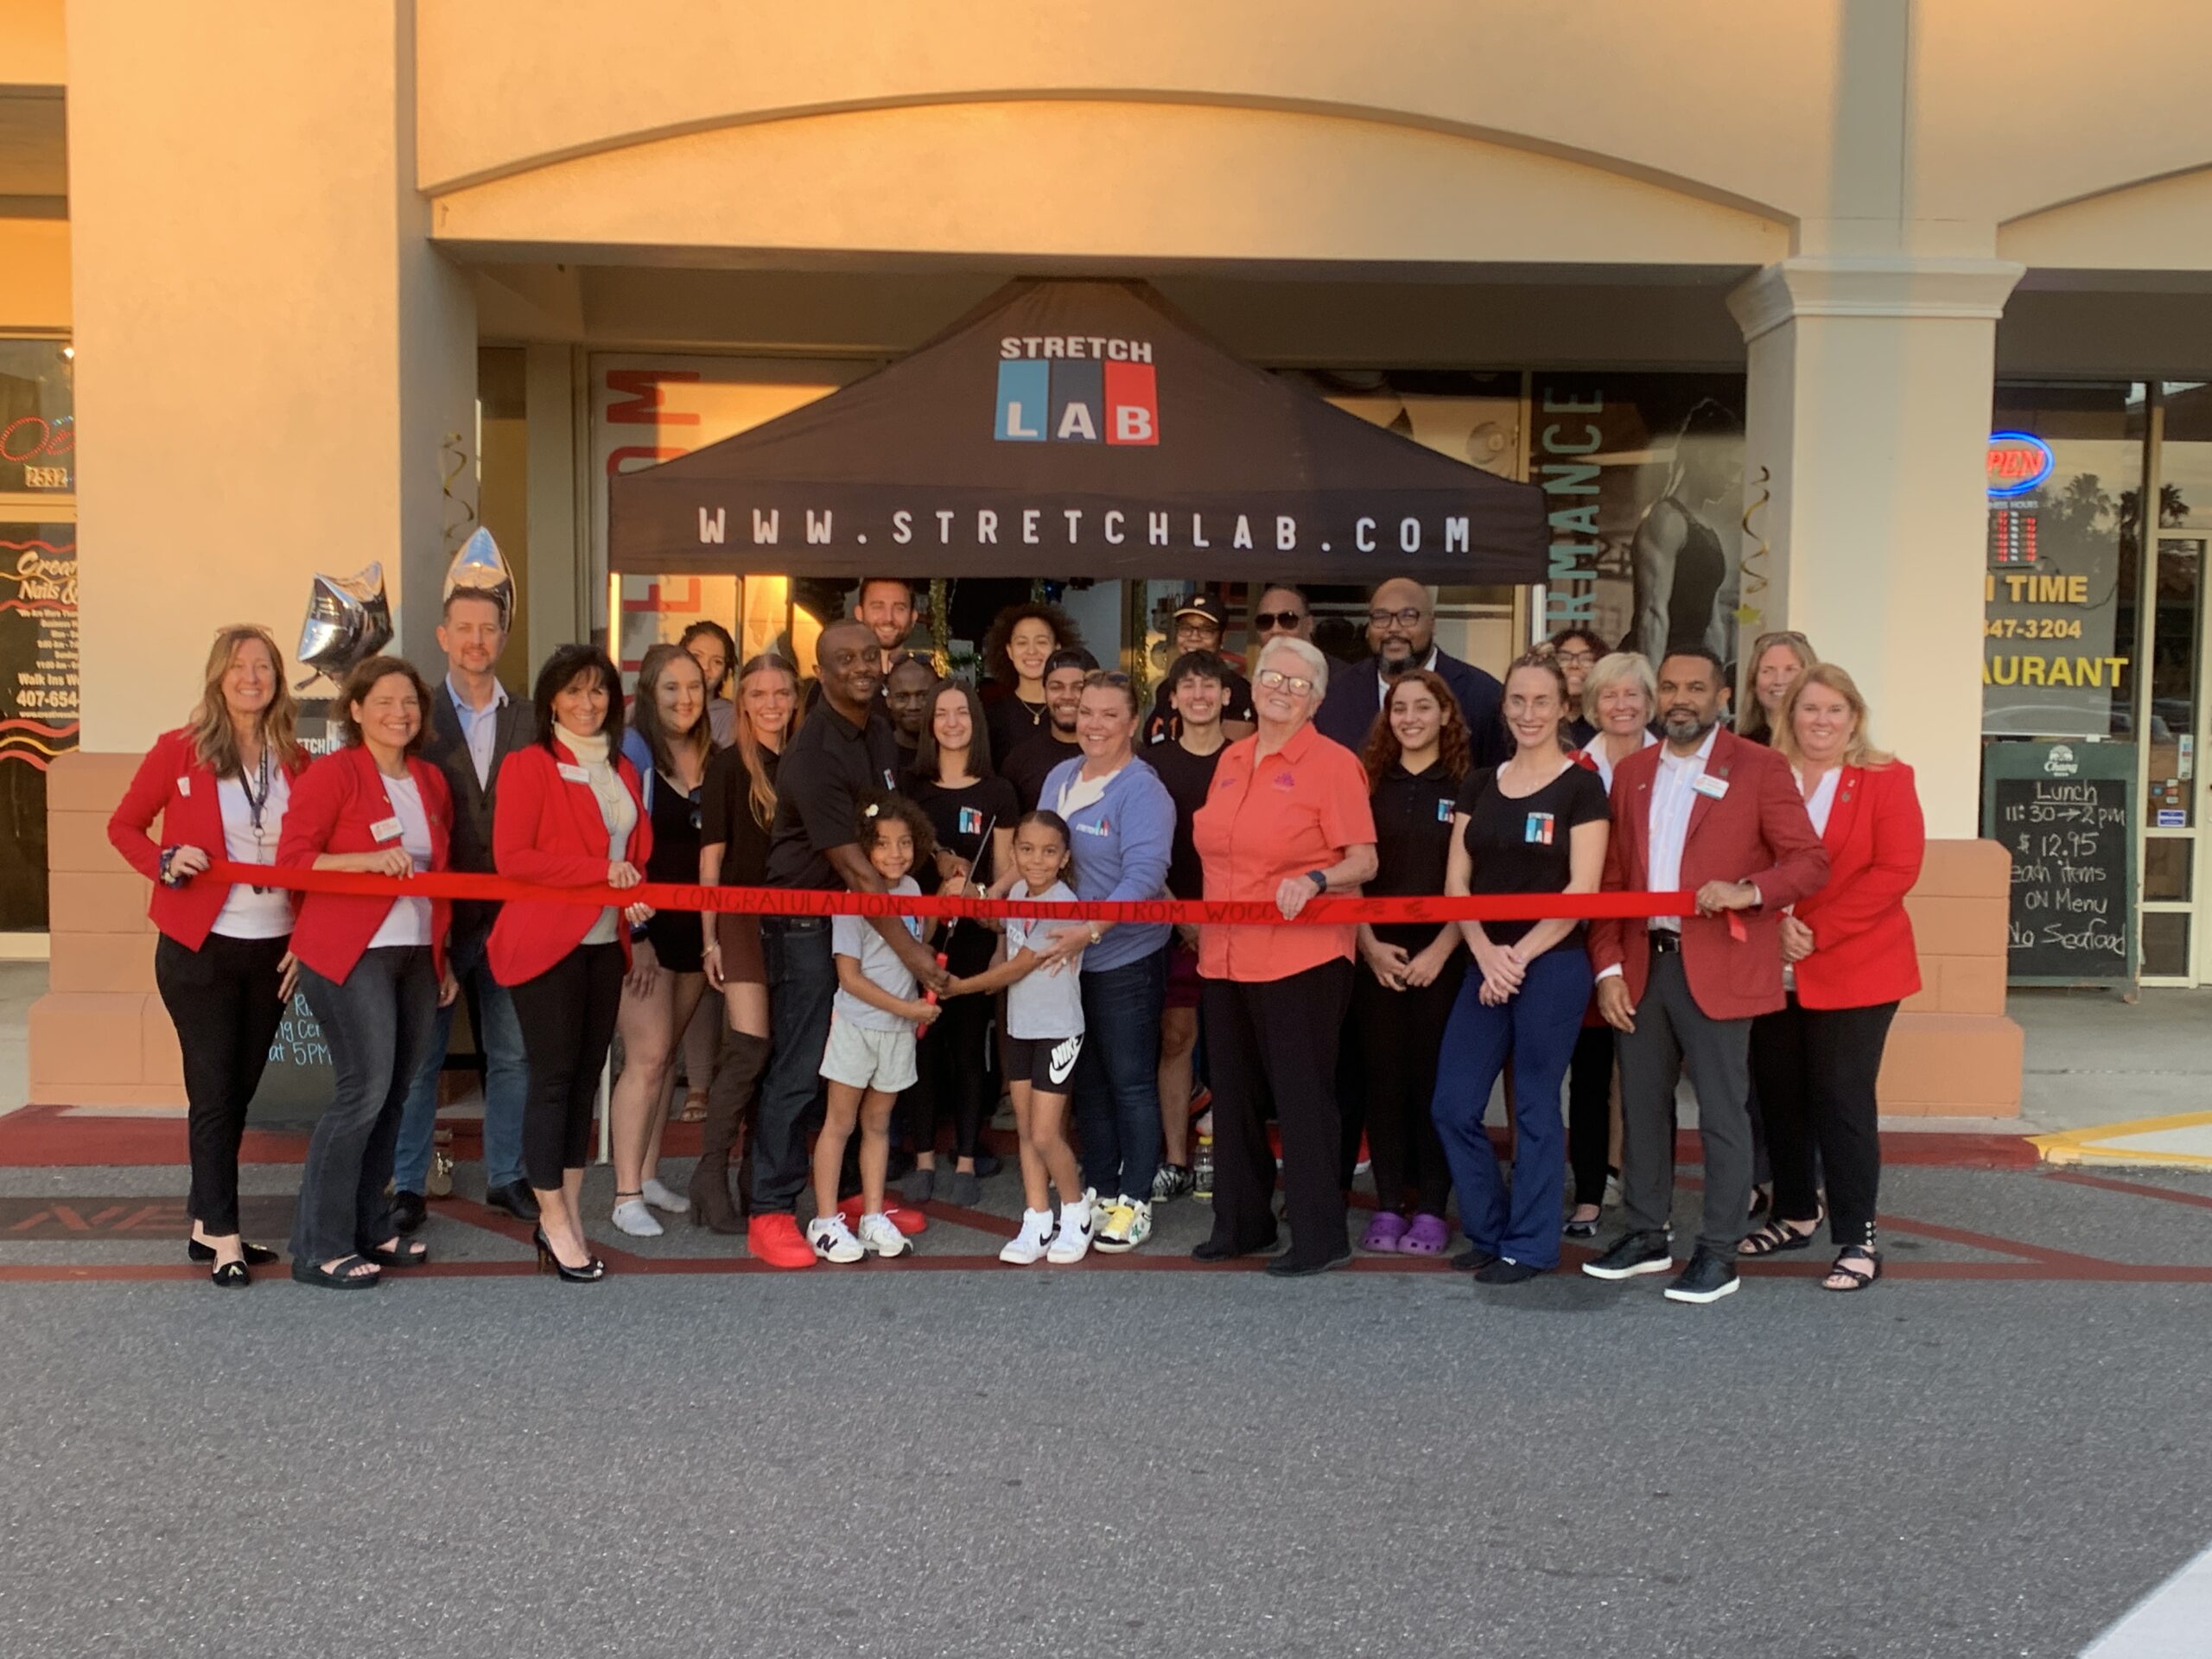 Tommy Hilfiger Ribbon Cutting  Orange County Chamber of Commerce